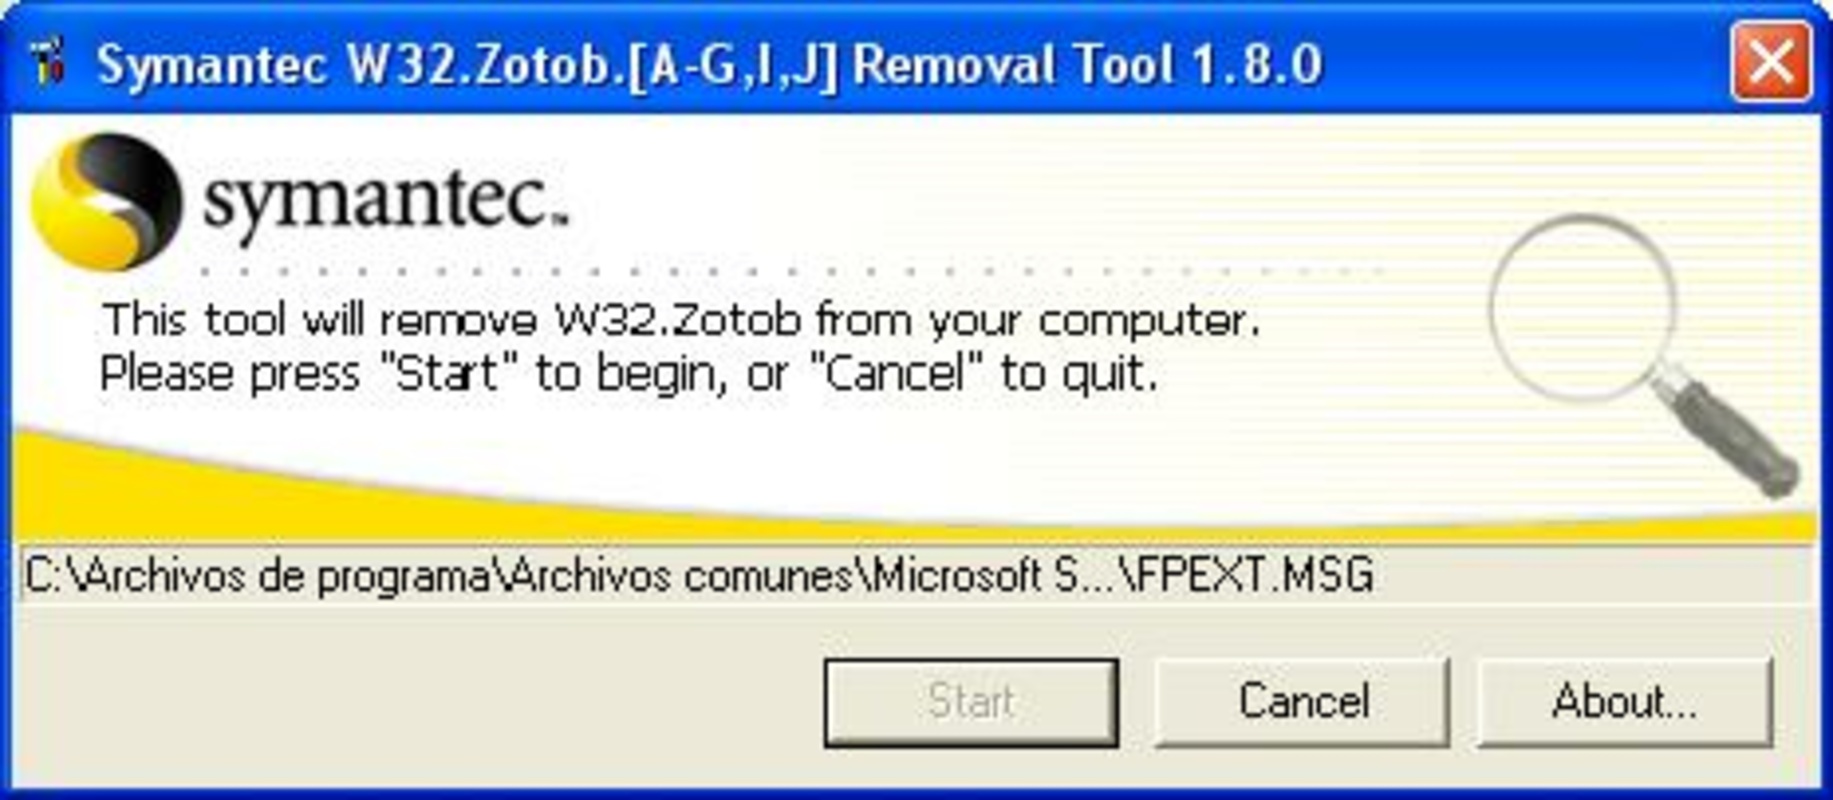 W32 Zotob Free Removal Tool 1.8.0 feature